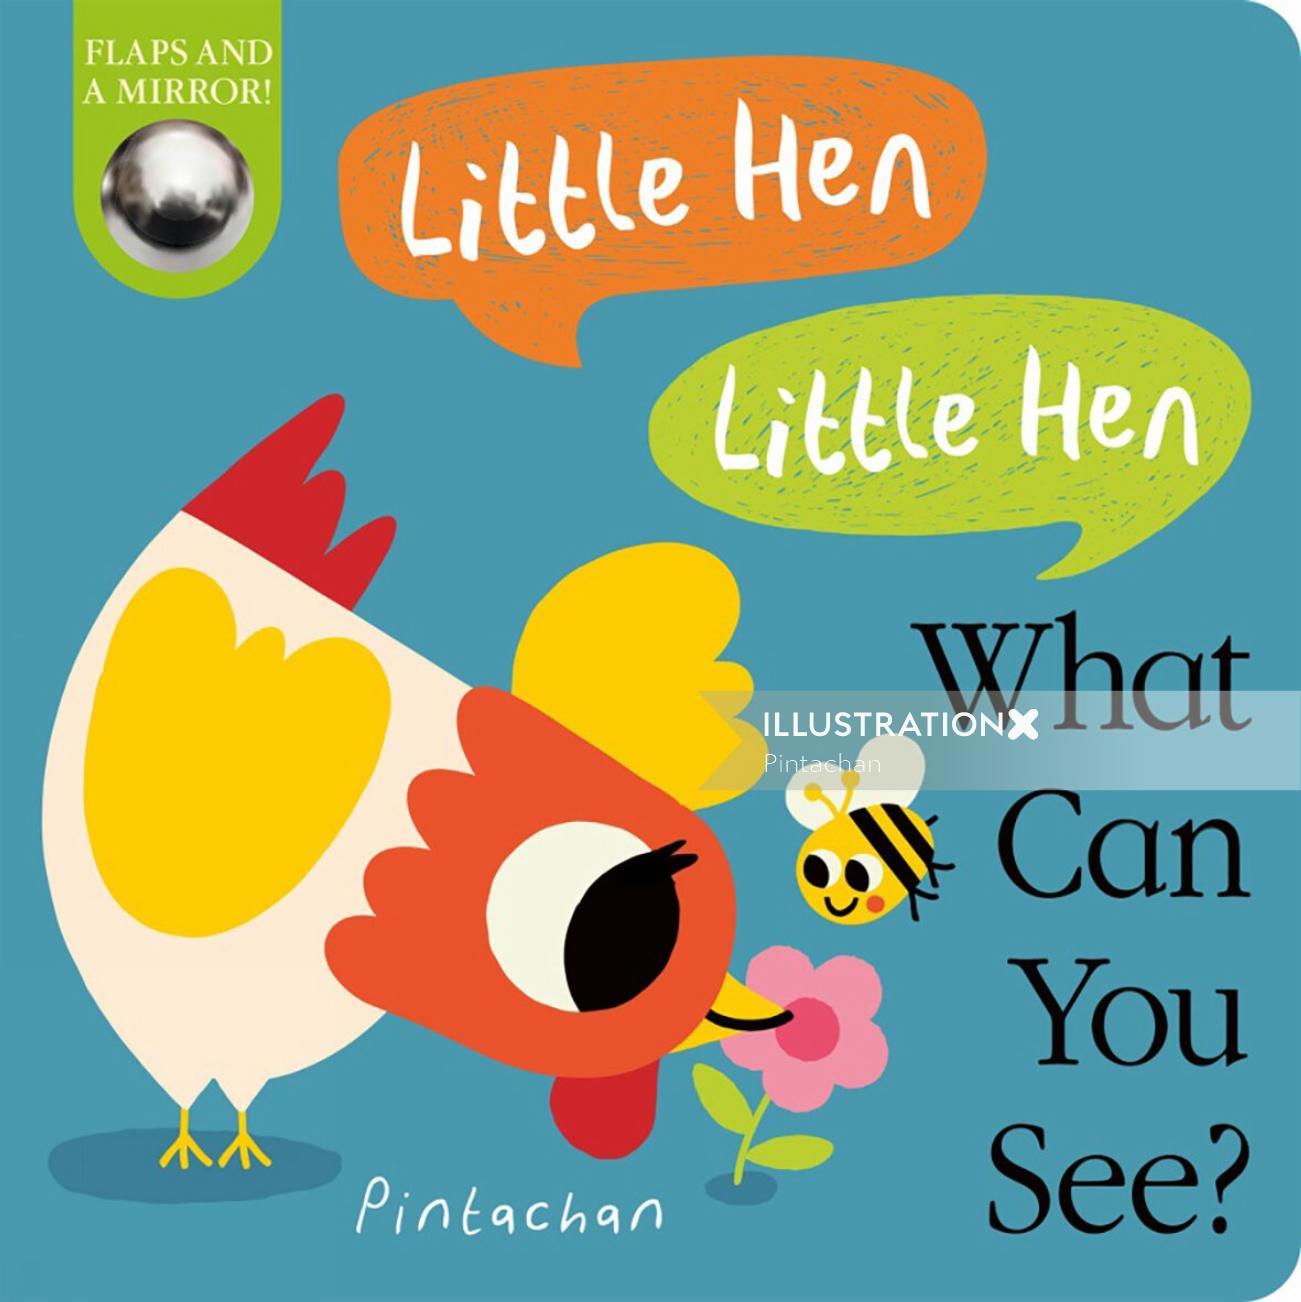 Little Hen, Little Hen, What Can You See? book cover illustration 